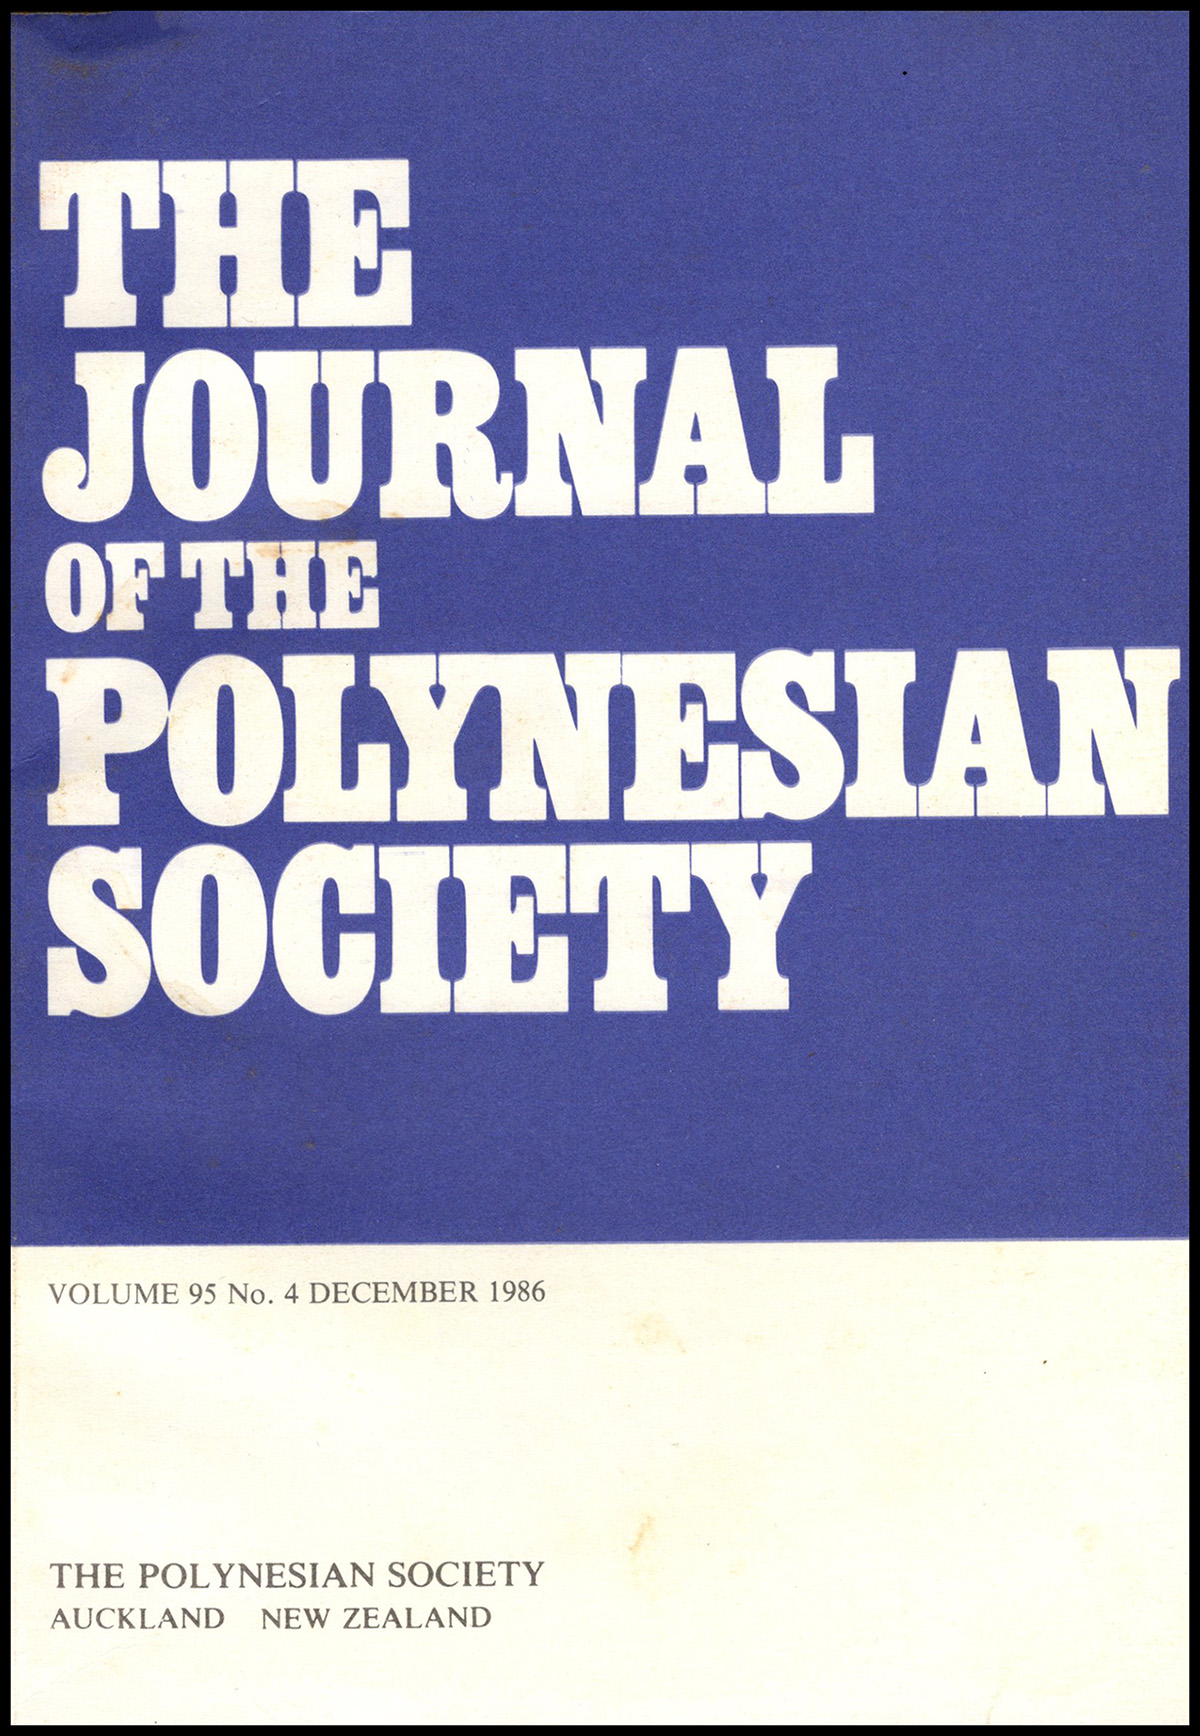 Chambers, Keith S. (editor) - The Journal of the Polynesian Society (Volume 95, No. 4, December 1986)